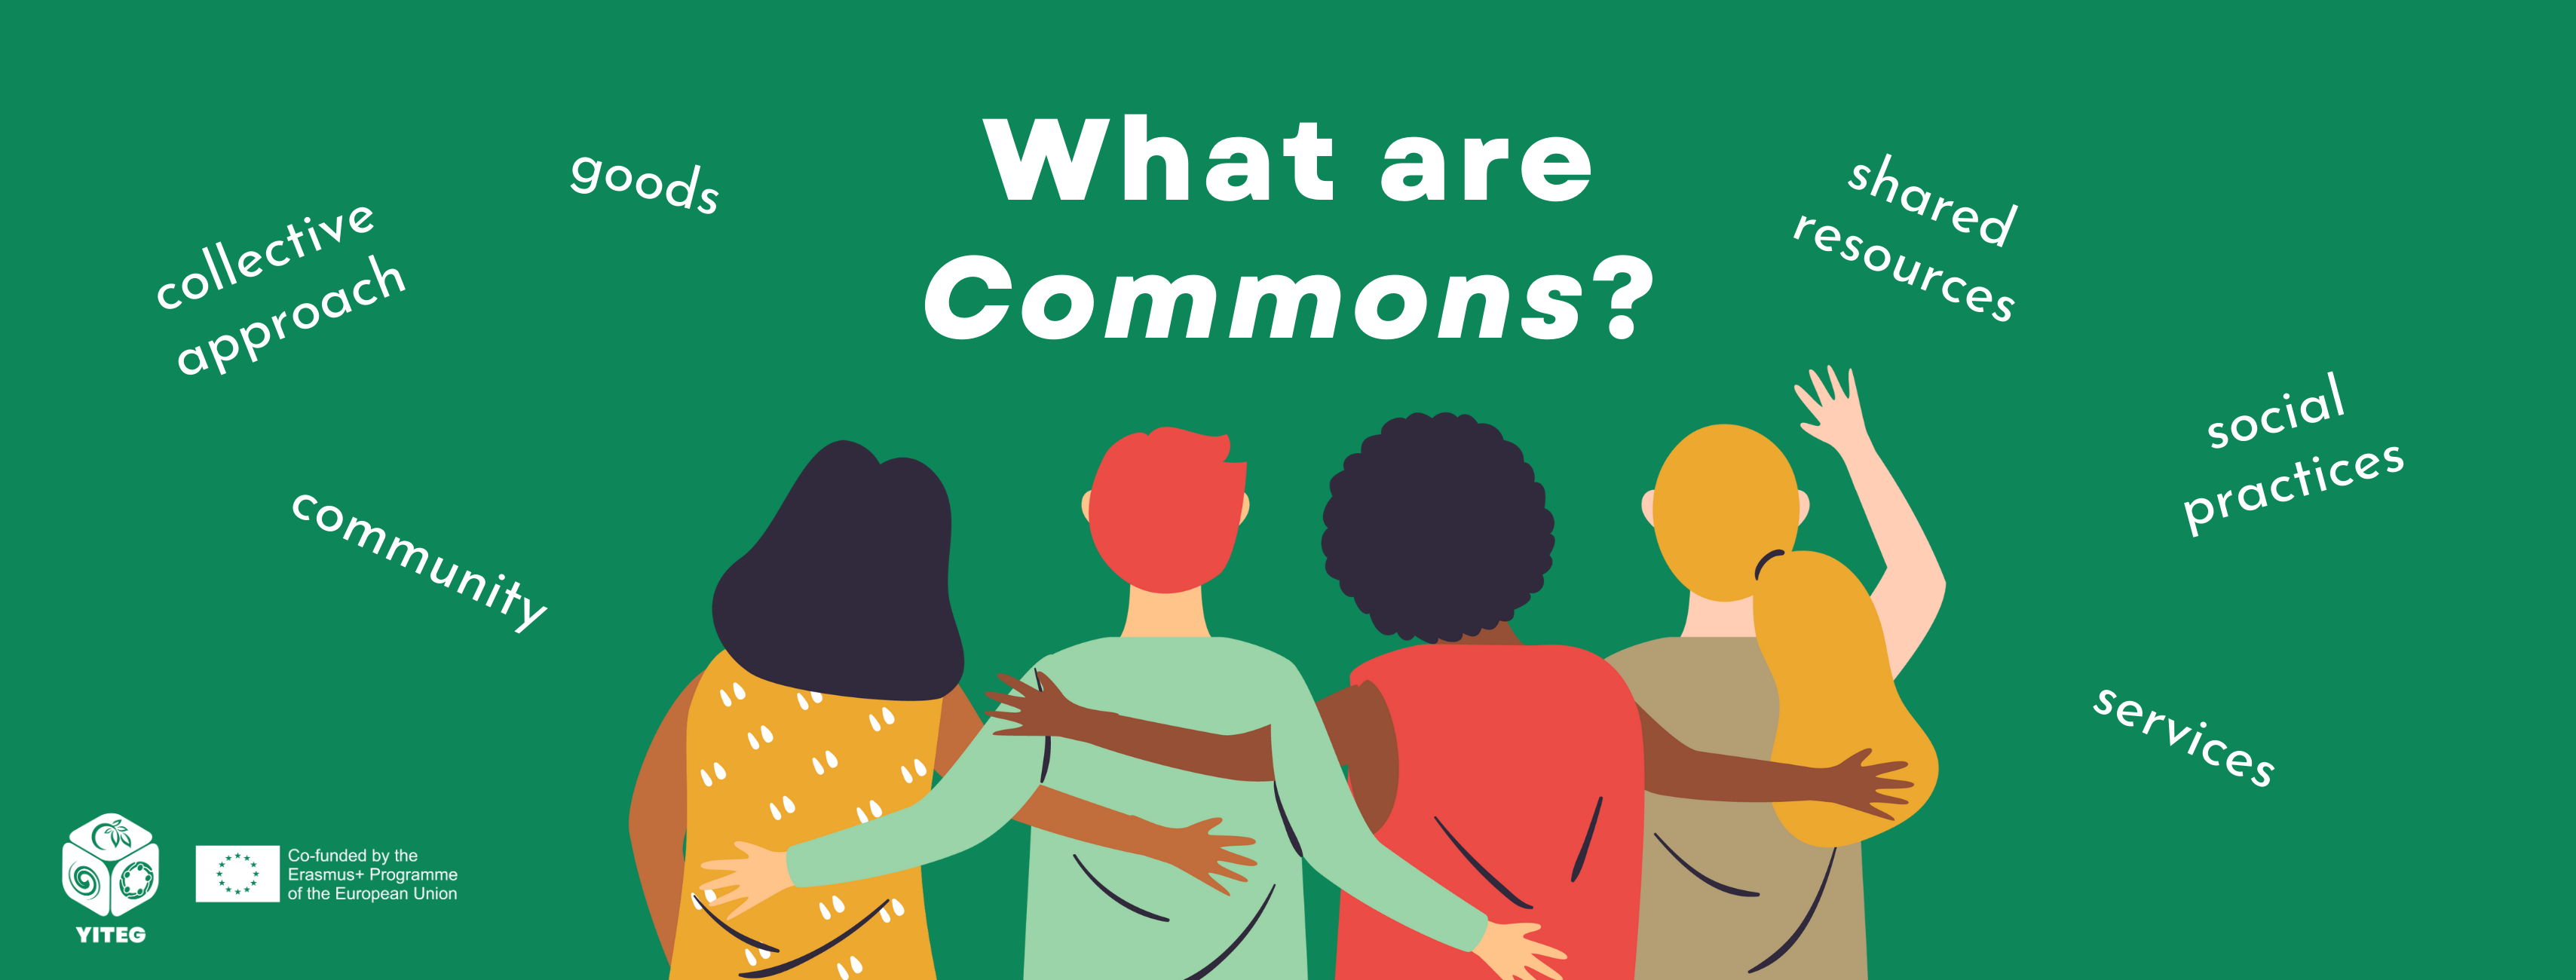 What are Commons?